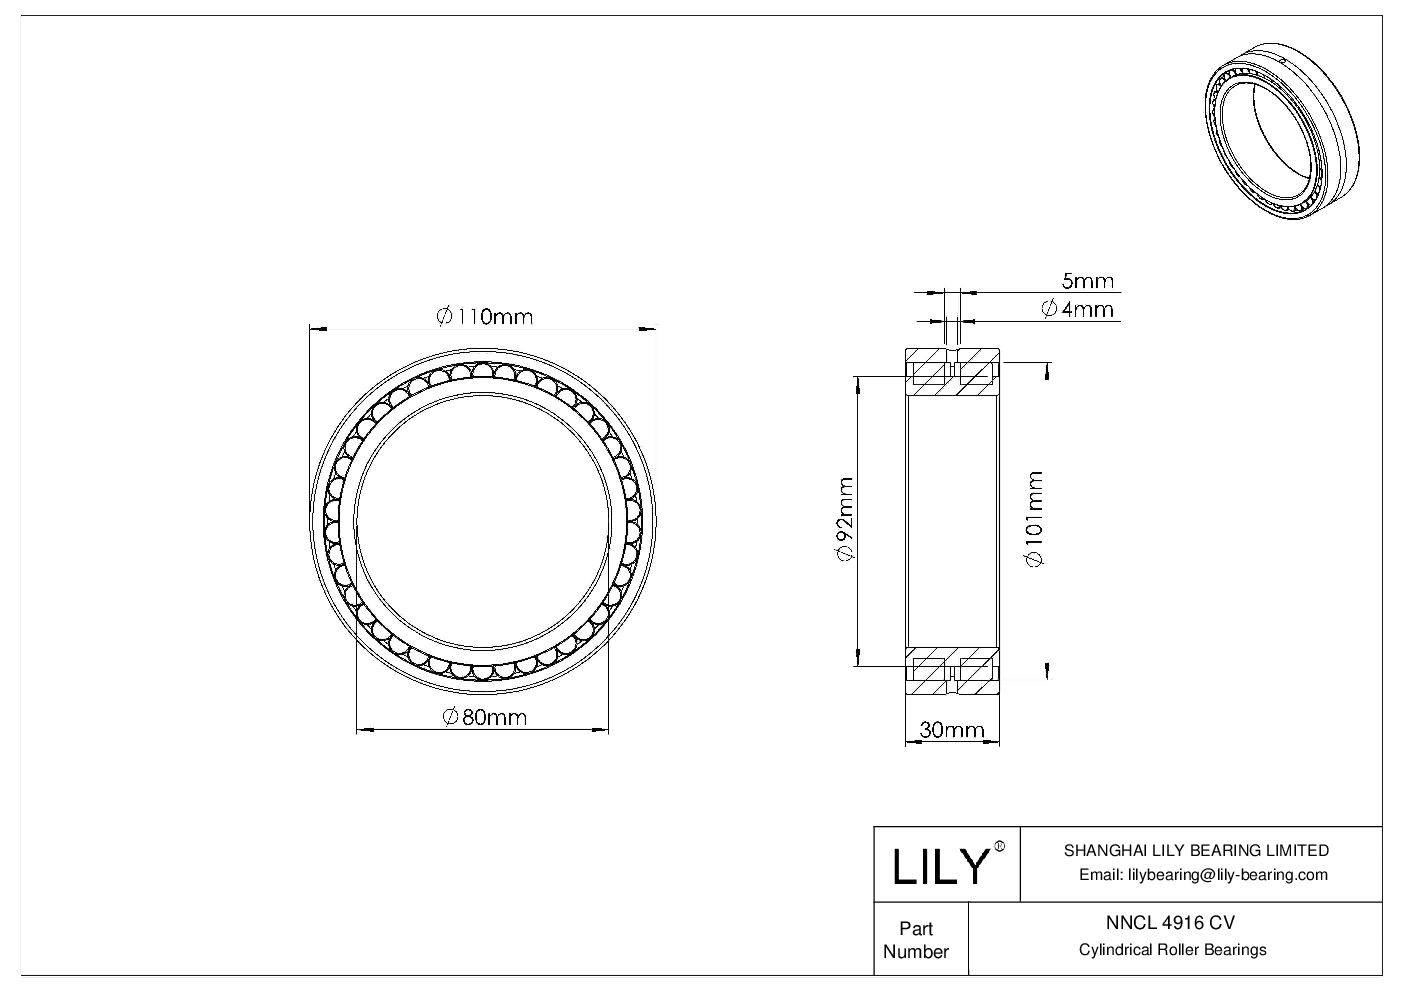 NNCL 4916 CV Double Row Full Complement Cylindrical Roller Bearings cad drawing